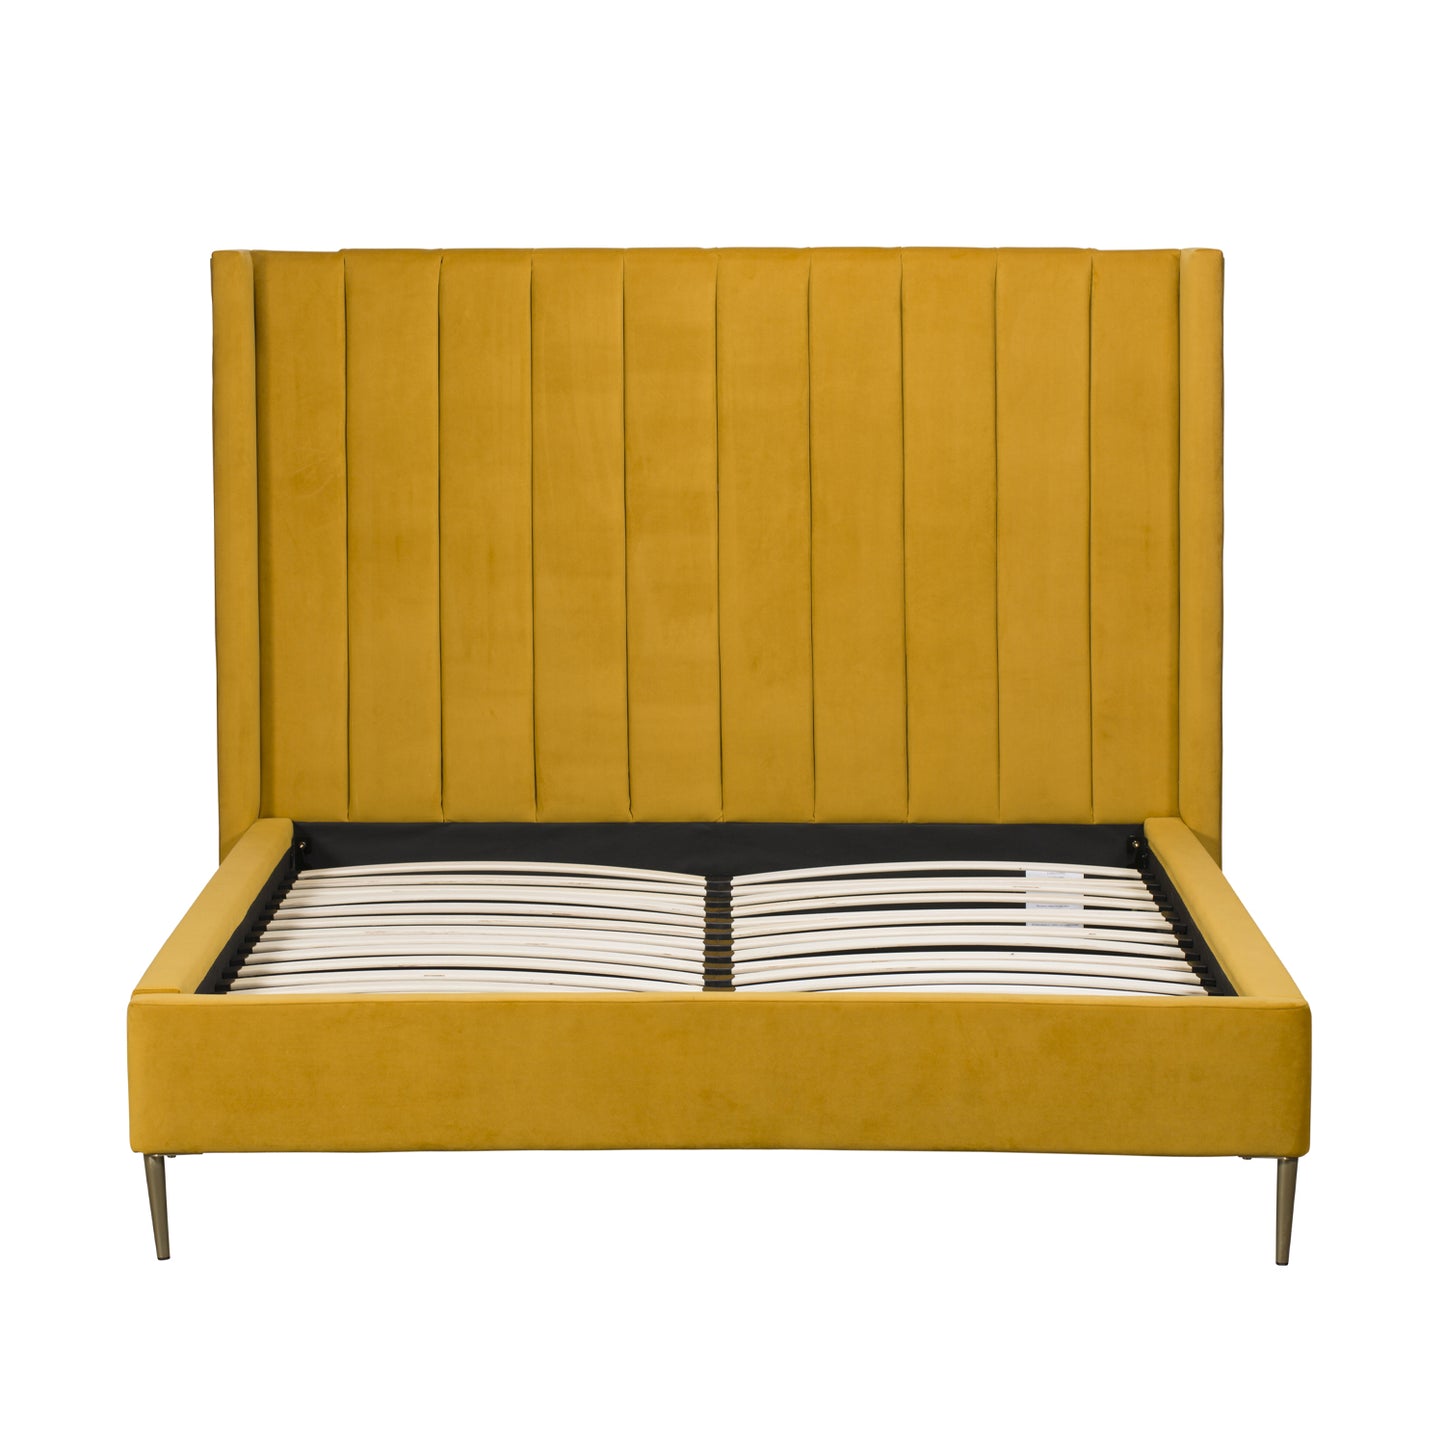 Maddox Highback Upholstered Bed - 5ft Turmeric